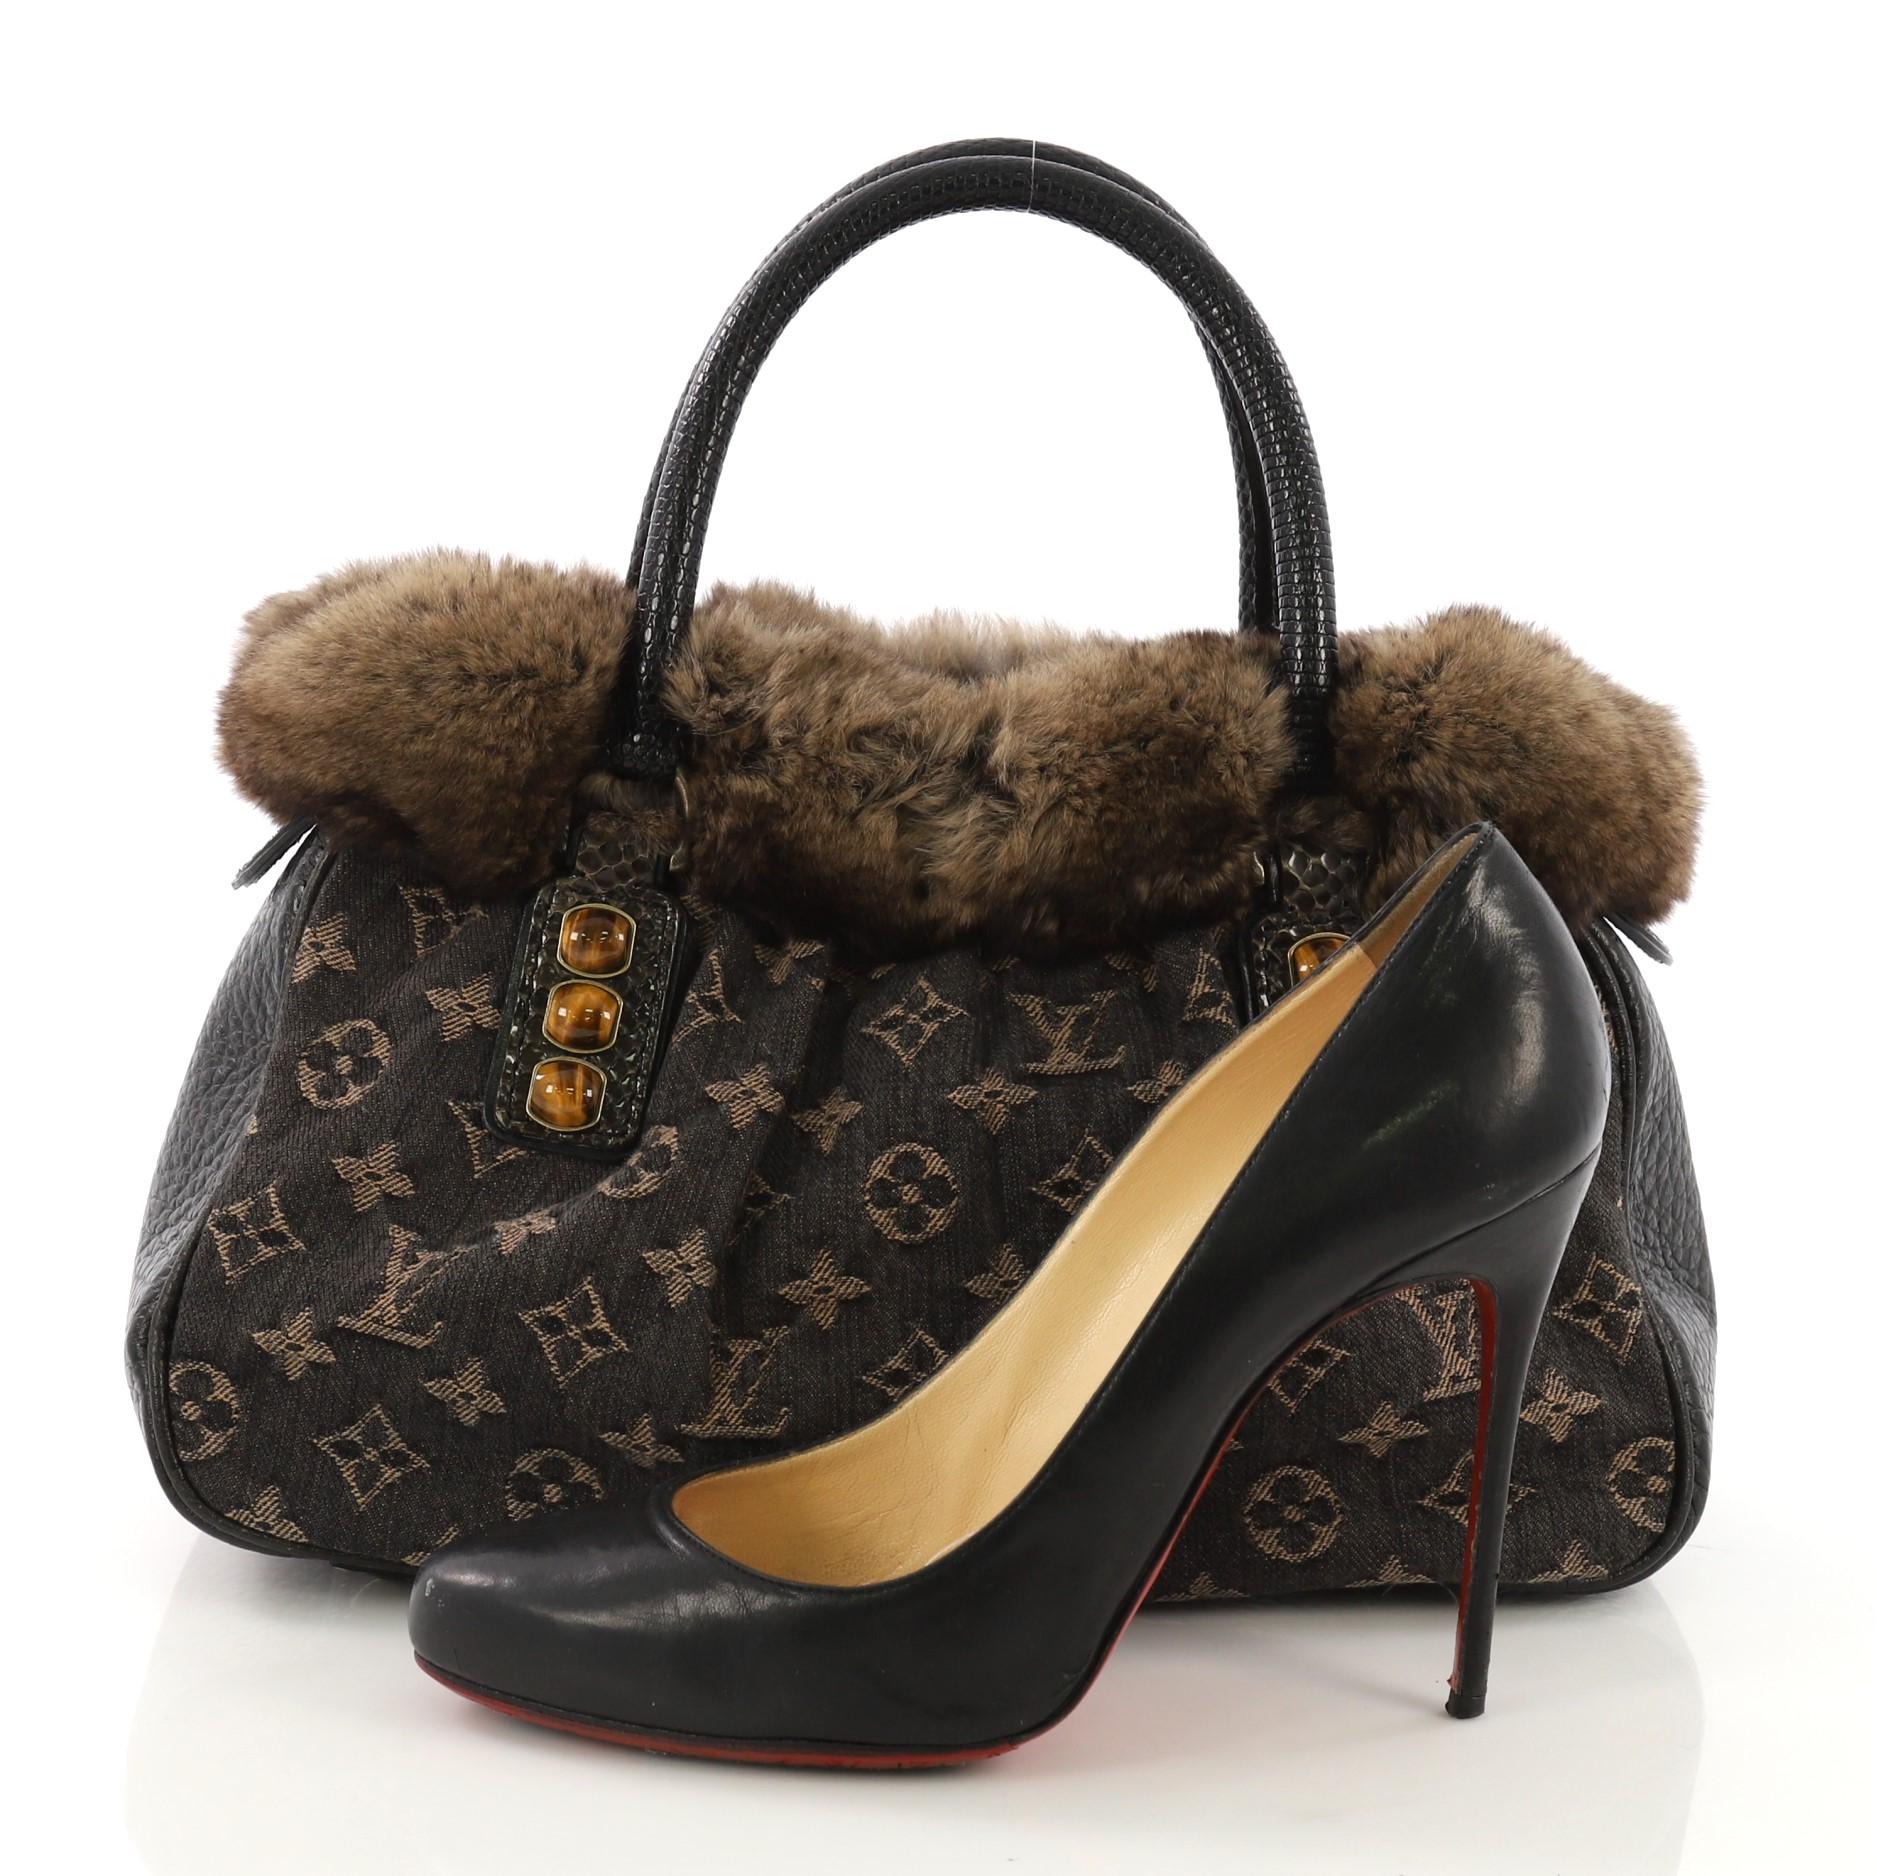 This Louis Vuitton Trapeze Handbag Denim with Fur and Lizard PM, crafted in black denim with genuine lizard and brown fur, features dual rolled handles, protective base studs, tiger eye embellishments, fur rim on top, and aged bronze-tone hardware.